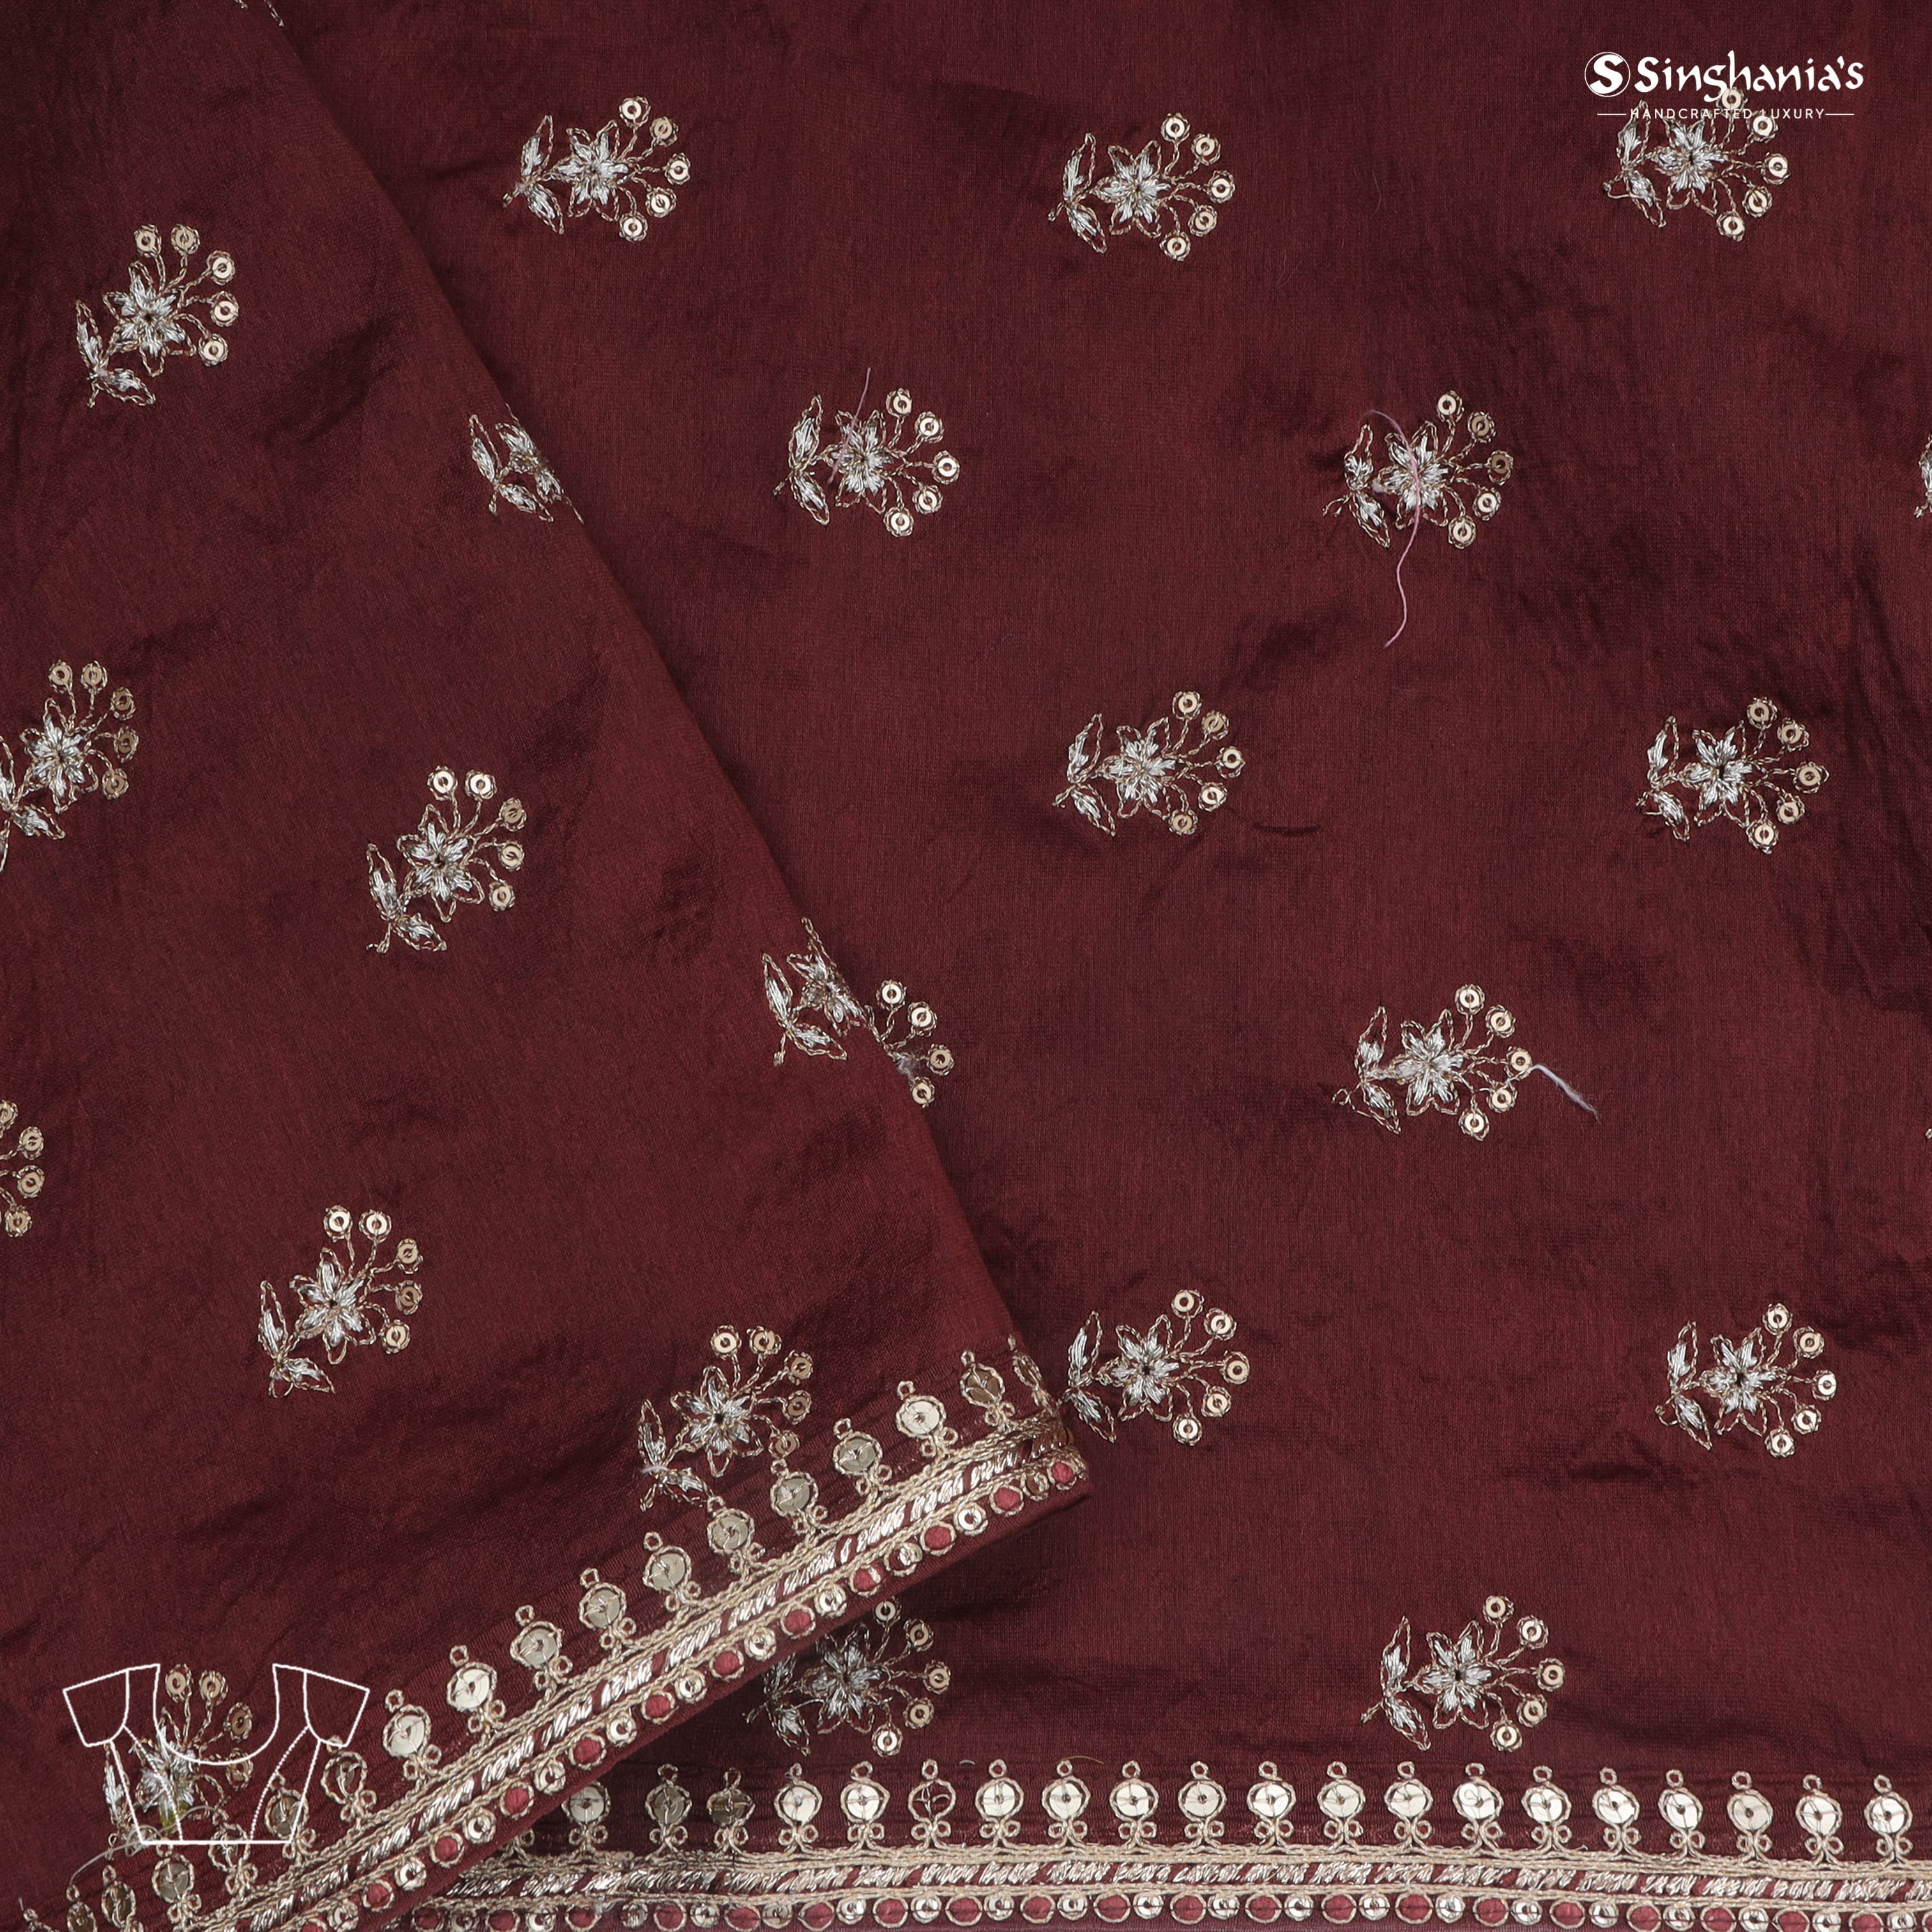 Dark Maroon Printed Tussar Saree With Sequin Embroidery